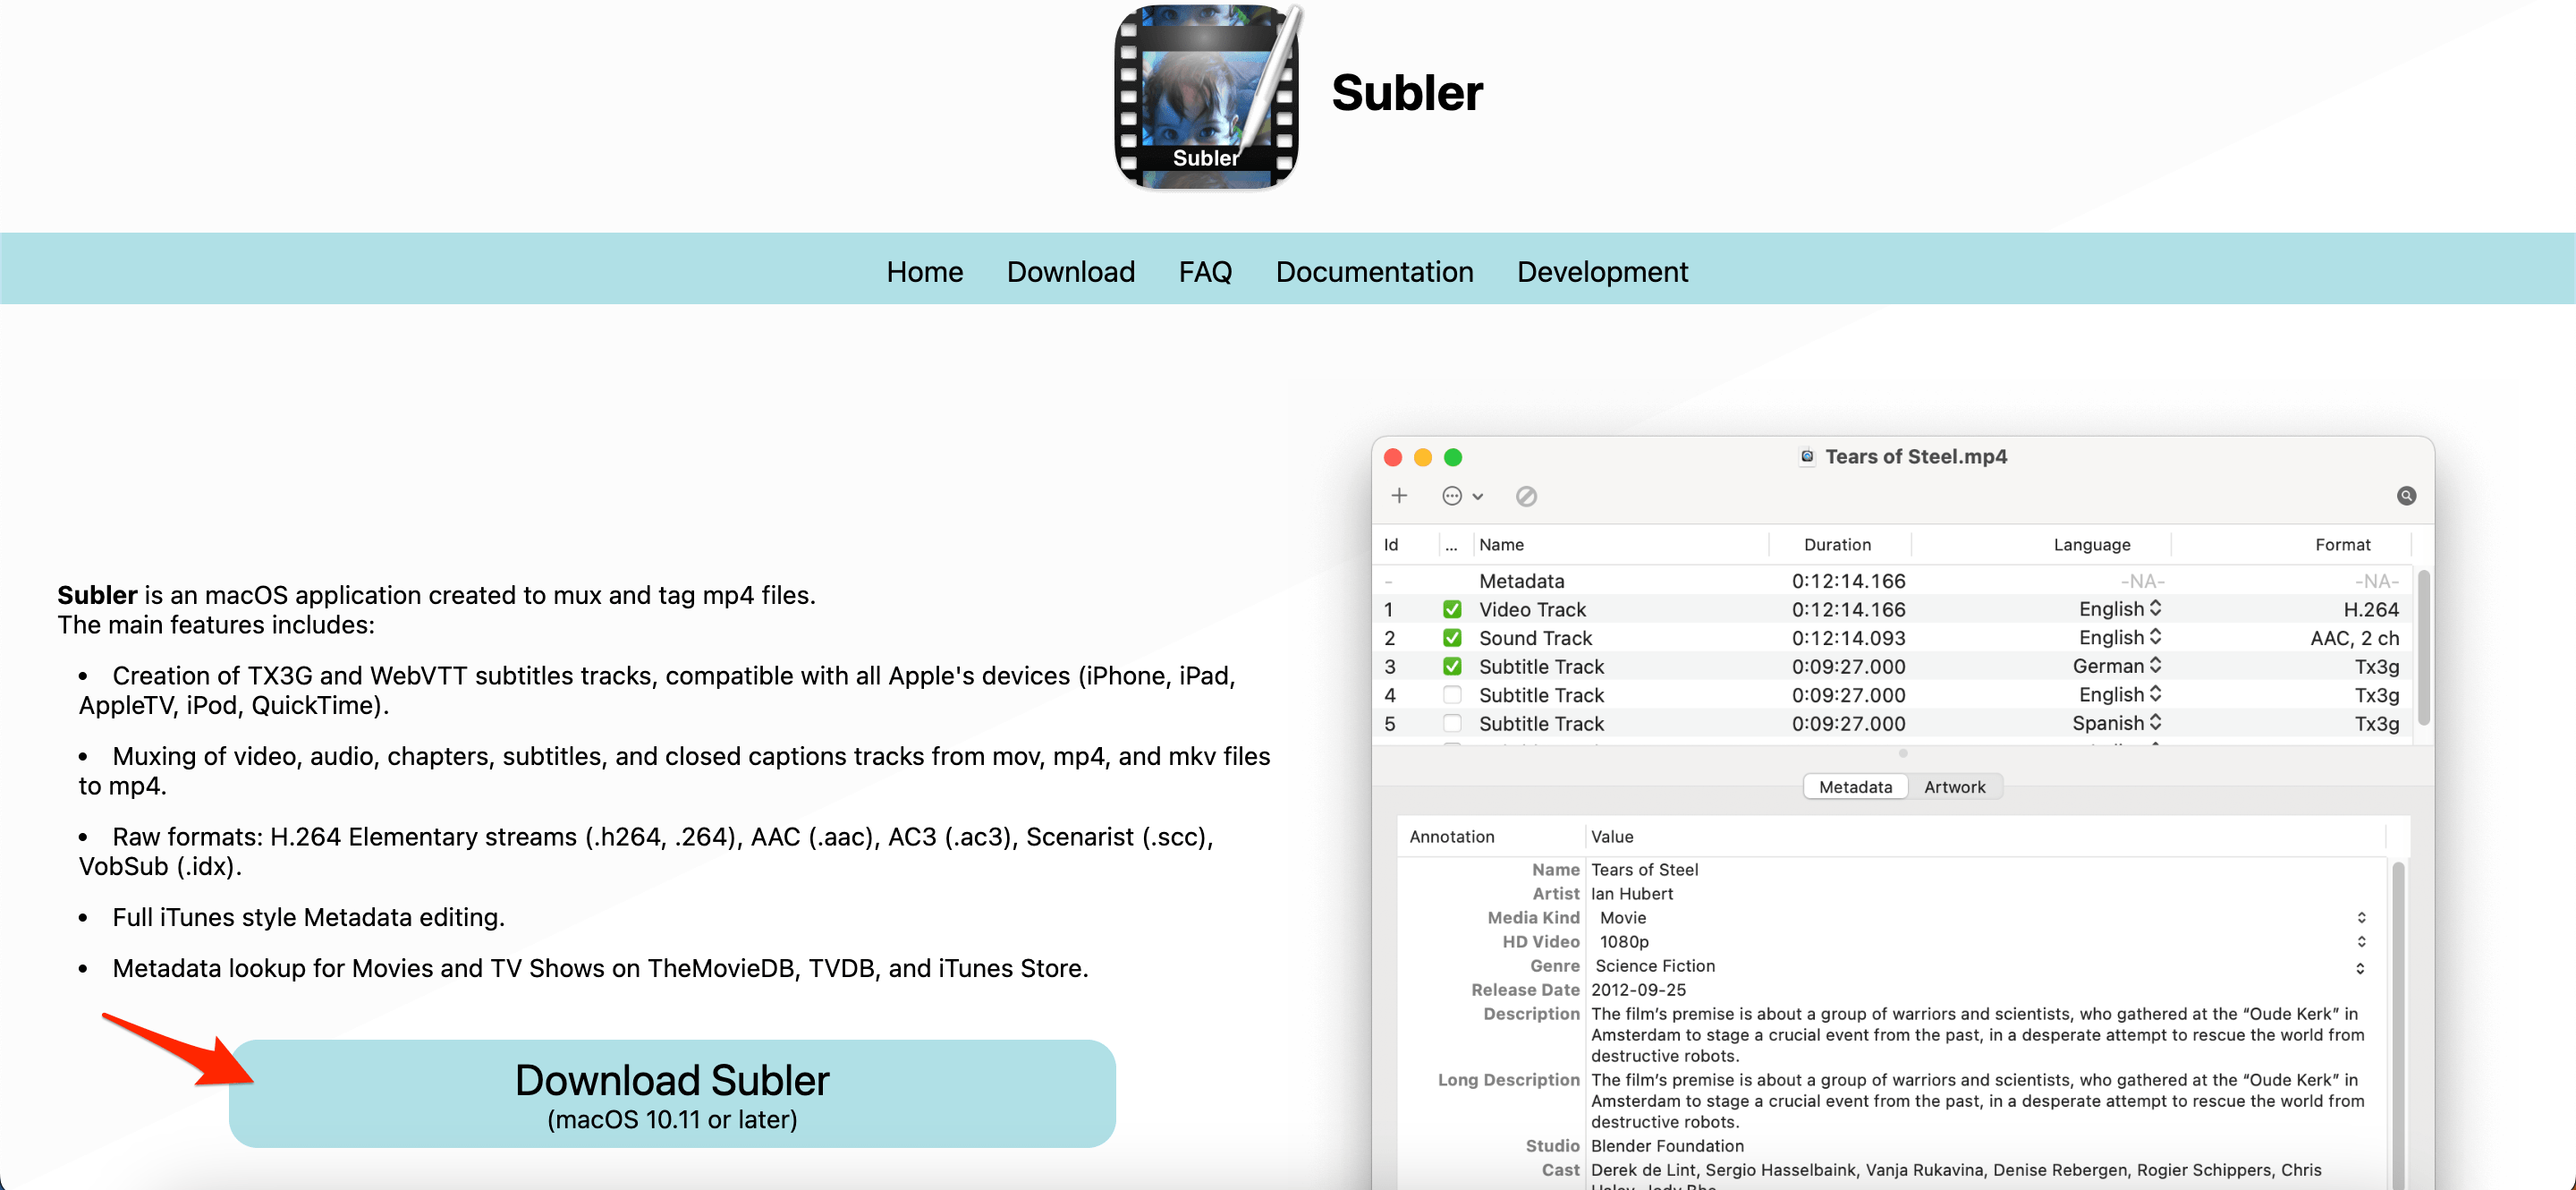 Download the Subler app on your Mac